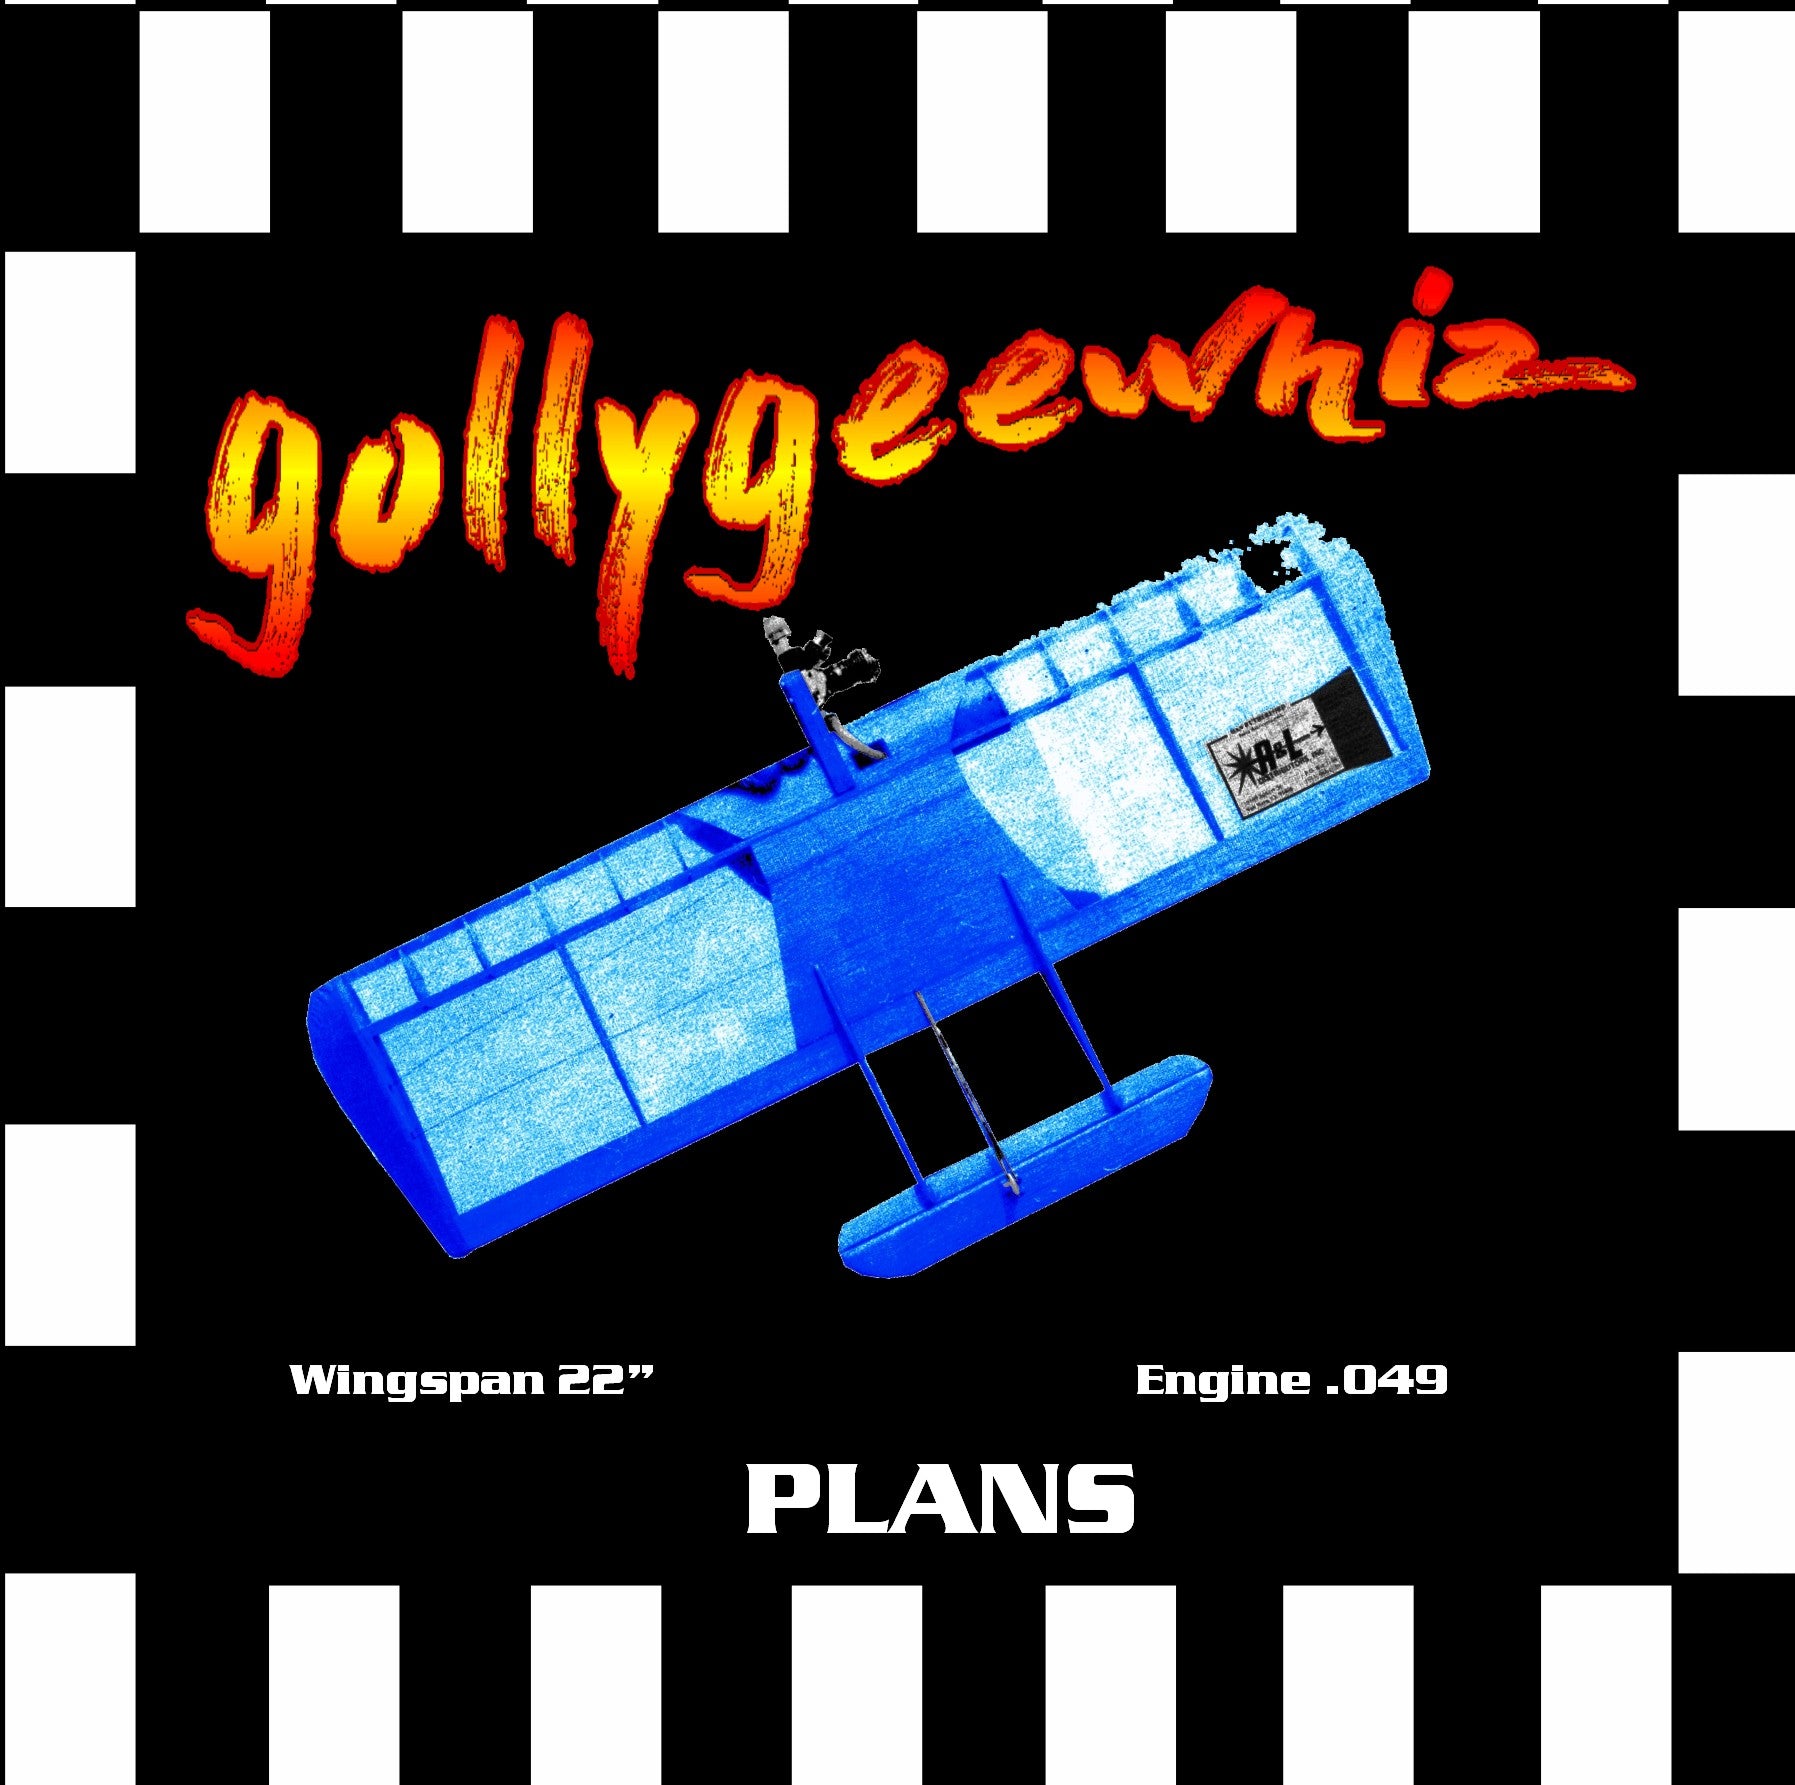 full size printed plan & building notes  half‑a combat *gollygeewhiz* engine .049  wingspan 22